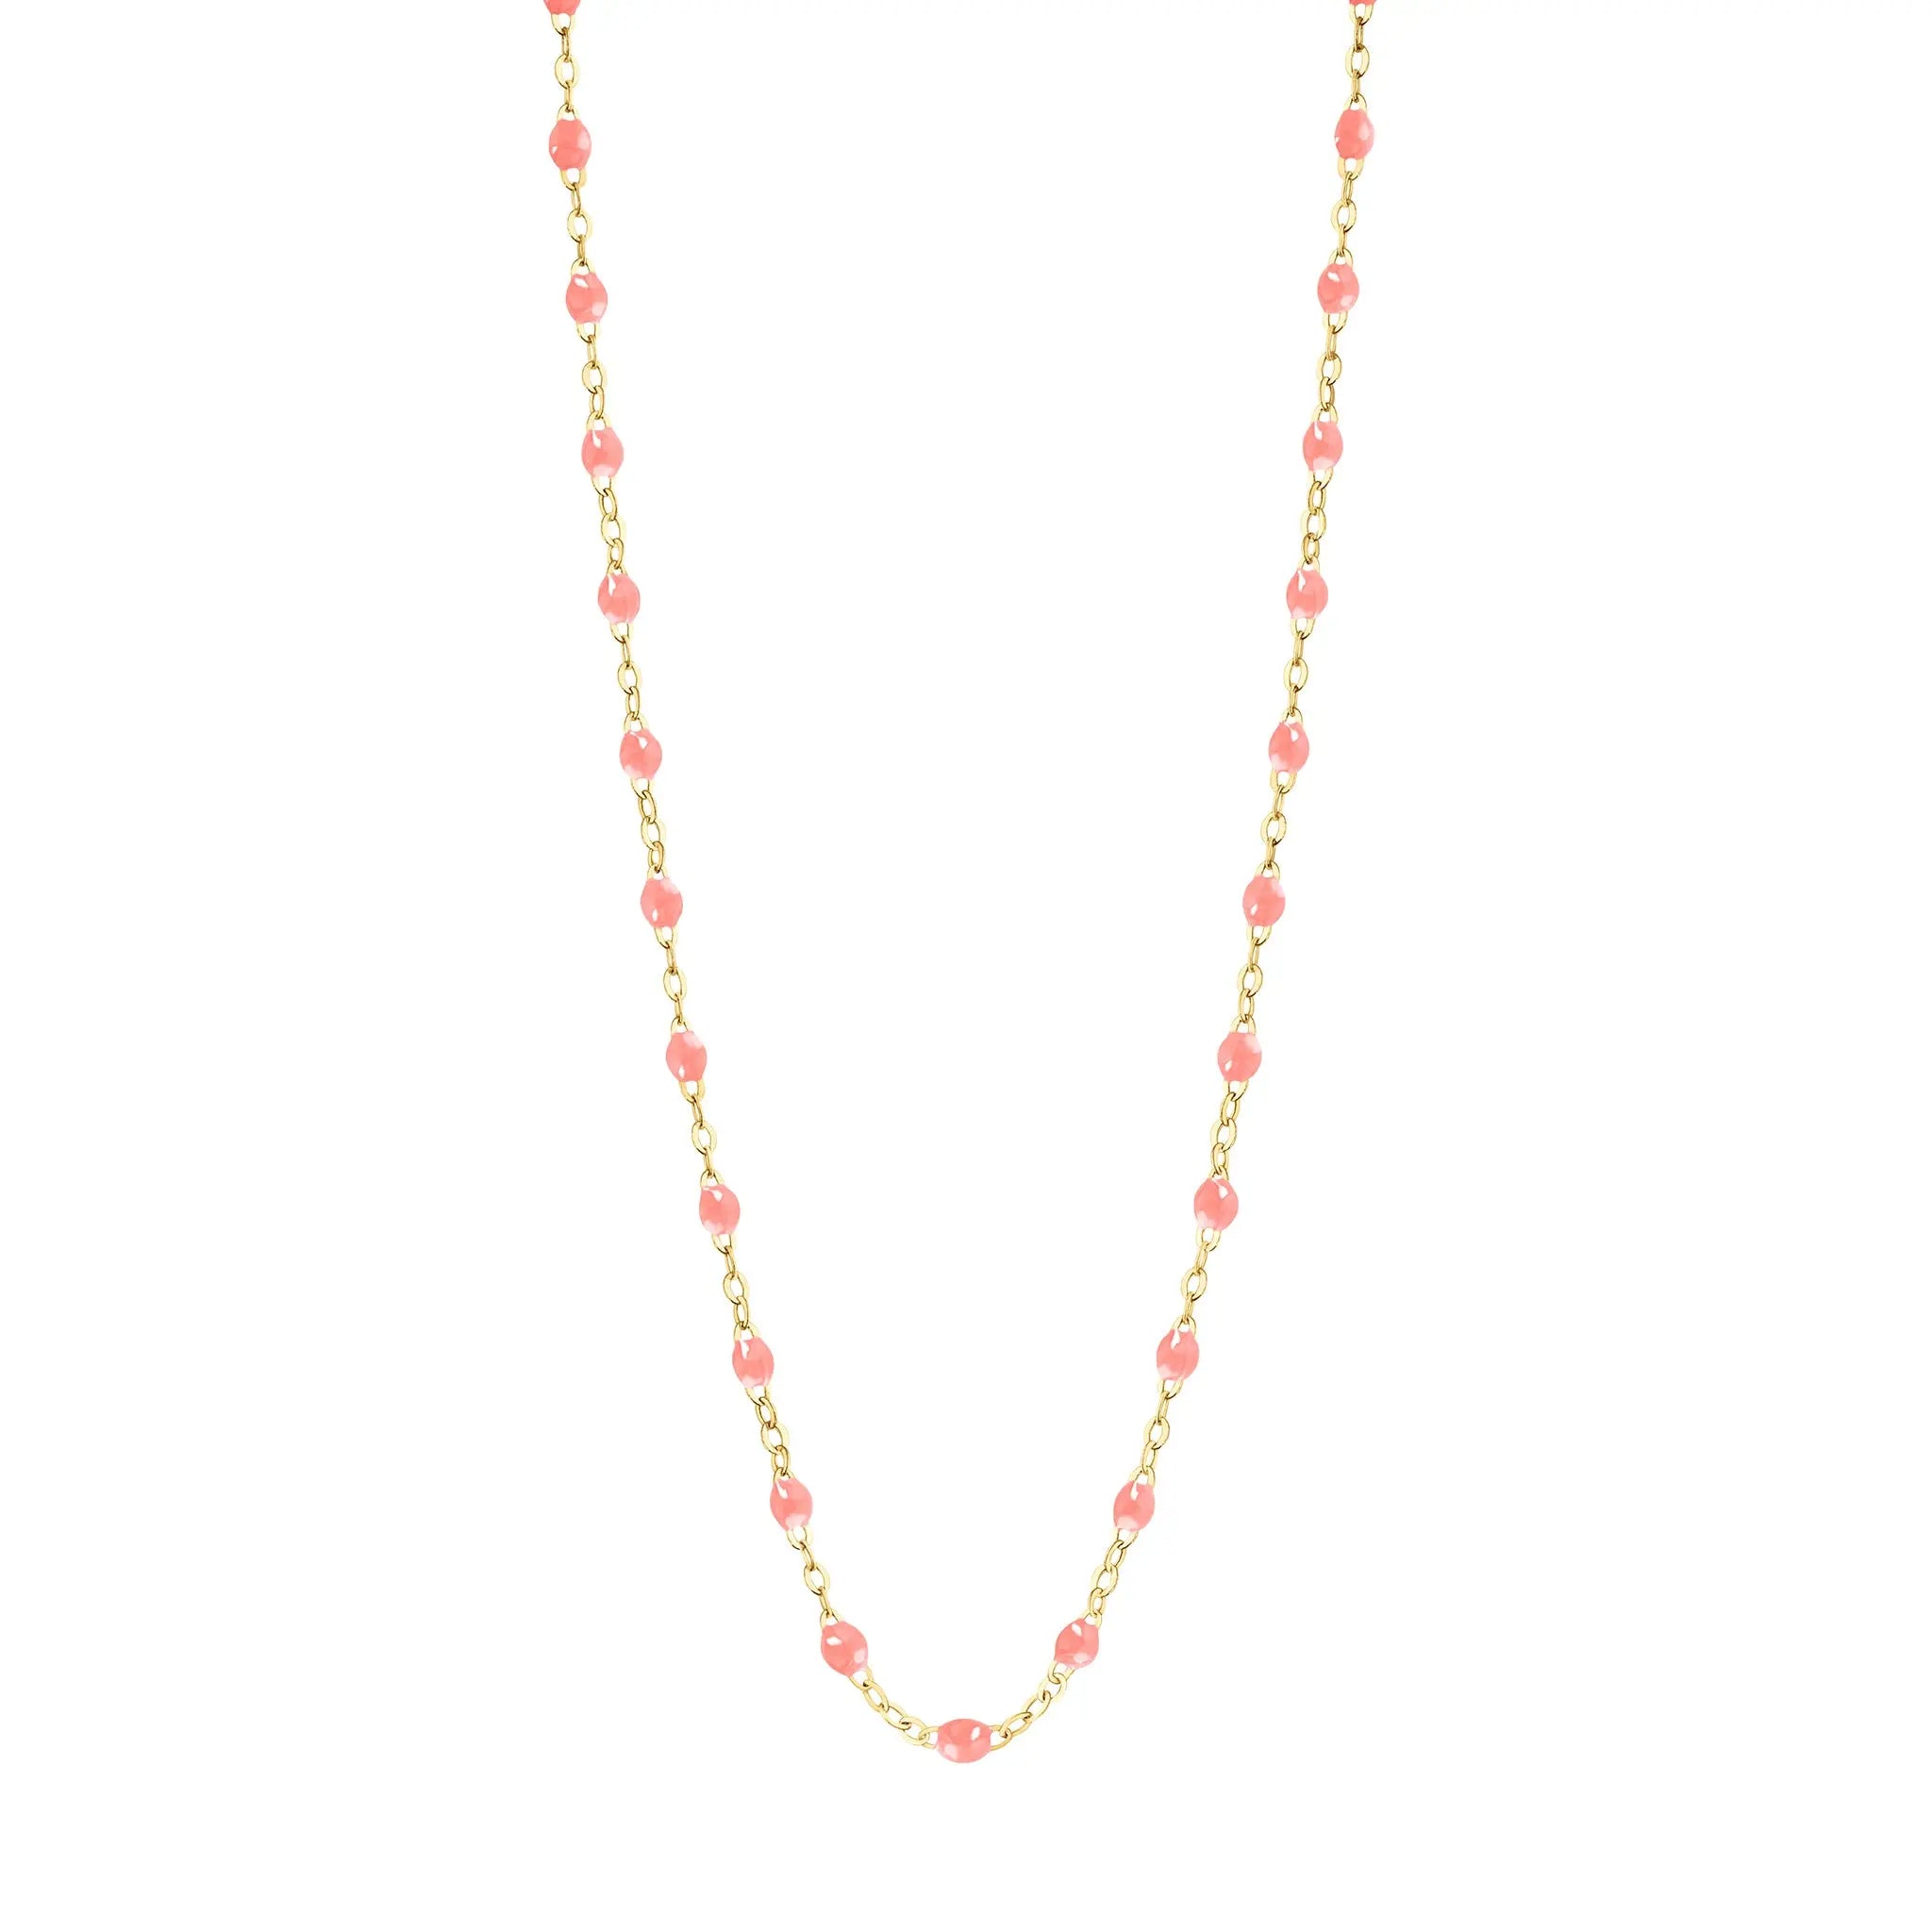 Stack you necklace layers with this versatile beaded chain! The Classic Gigi Necklace by gigi CLOZEAU features 18 carat yellow gold, and striking Fuchsia resin jewels for an everyday effortless appearance. Handcrafted in 18k yellow gold. The beads measure 1.50mm in diameter and is finished with a spring ring clasp. The length is 16.5 inches.